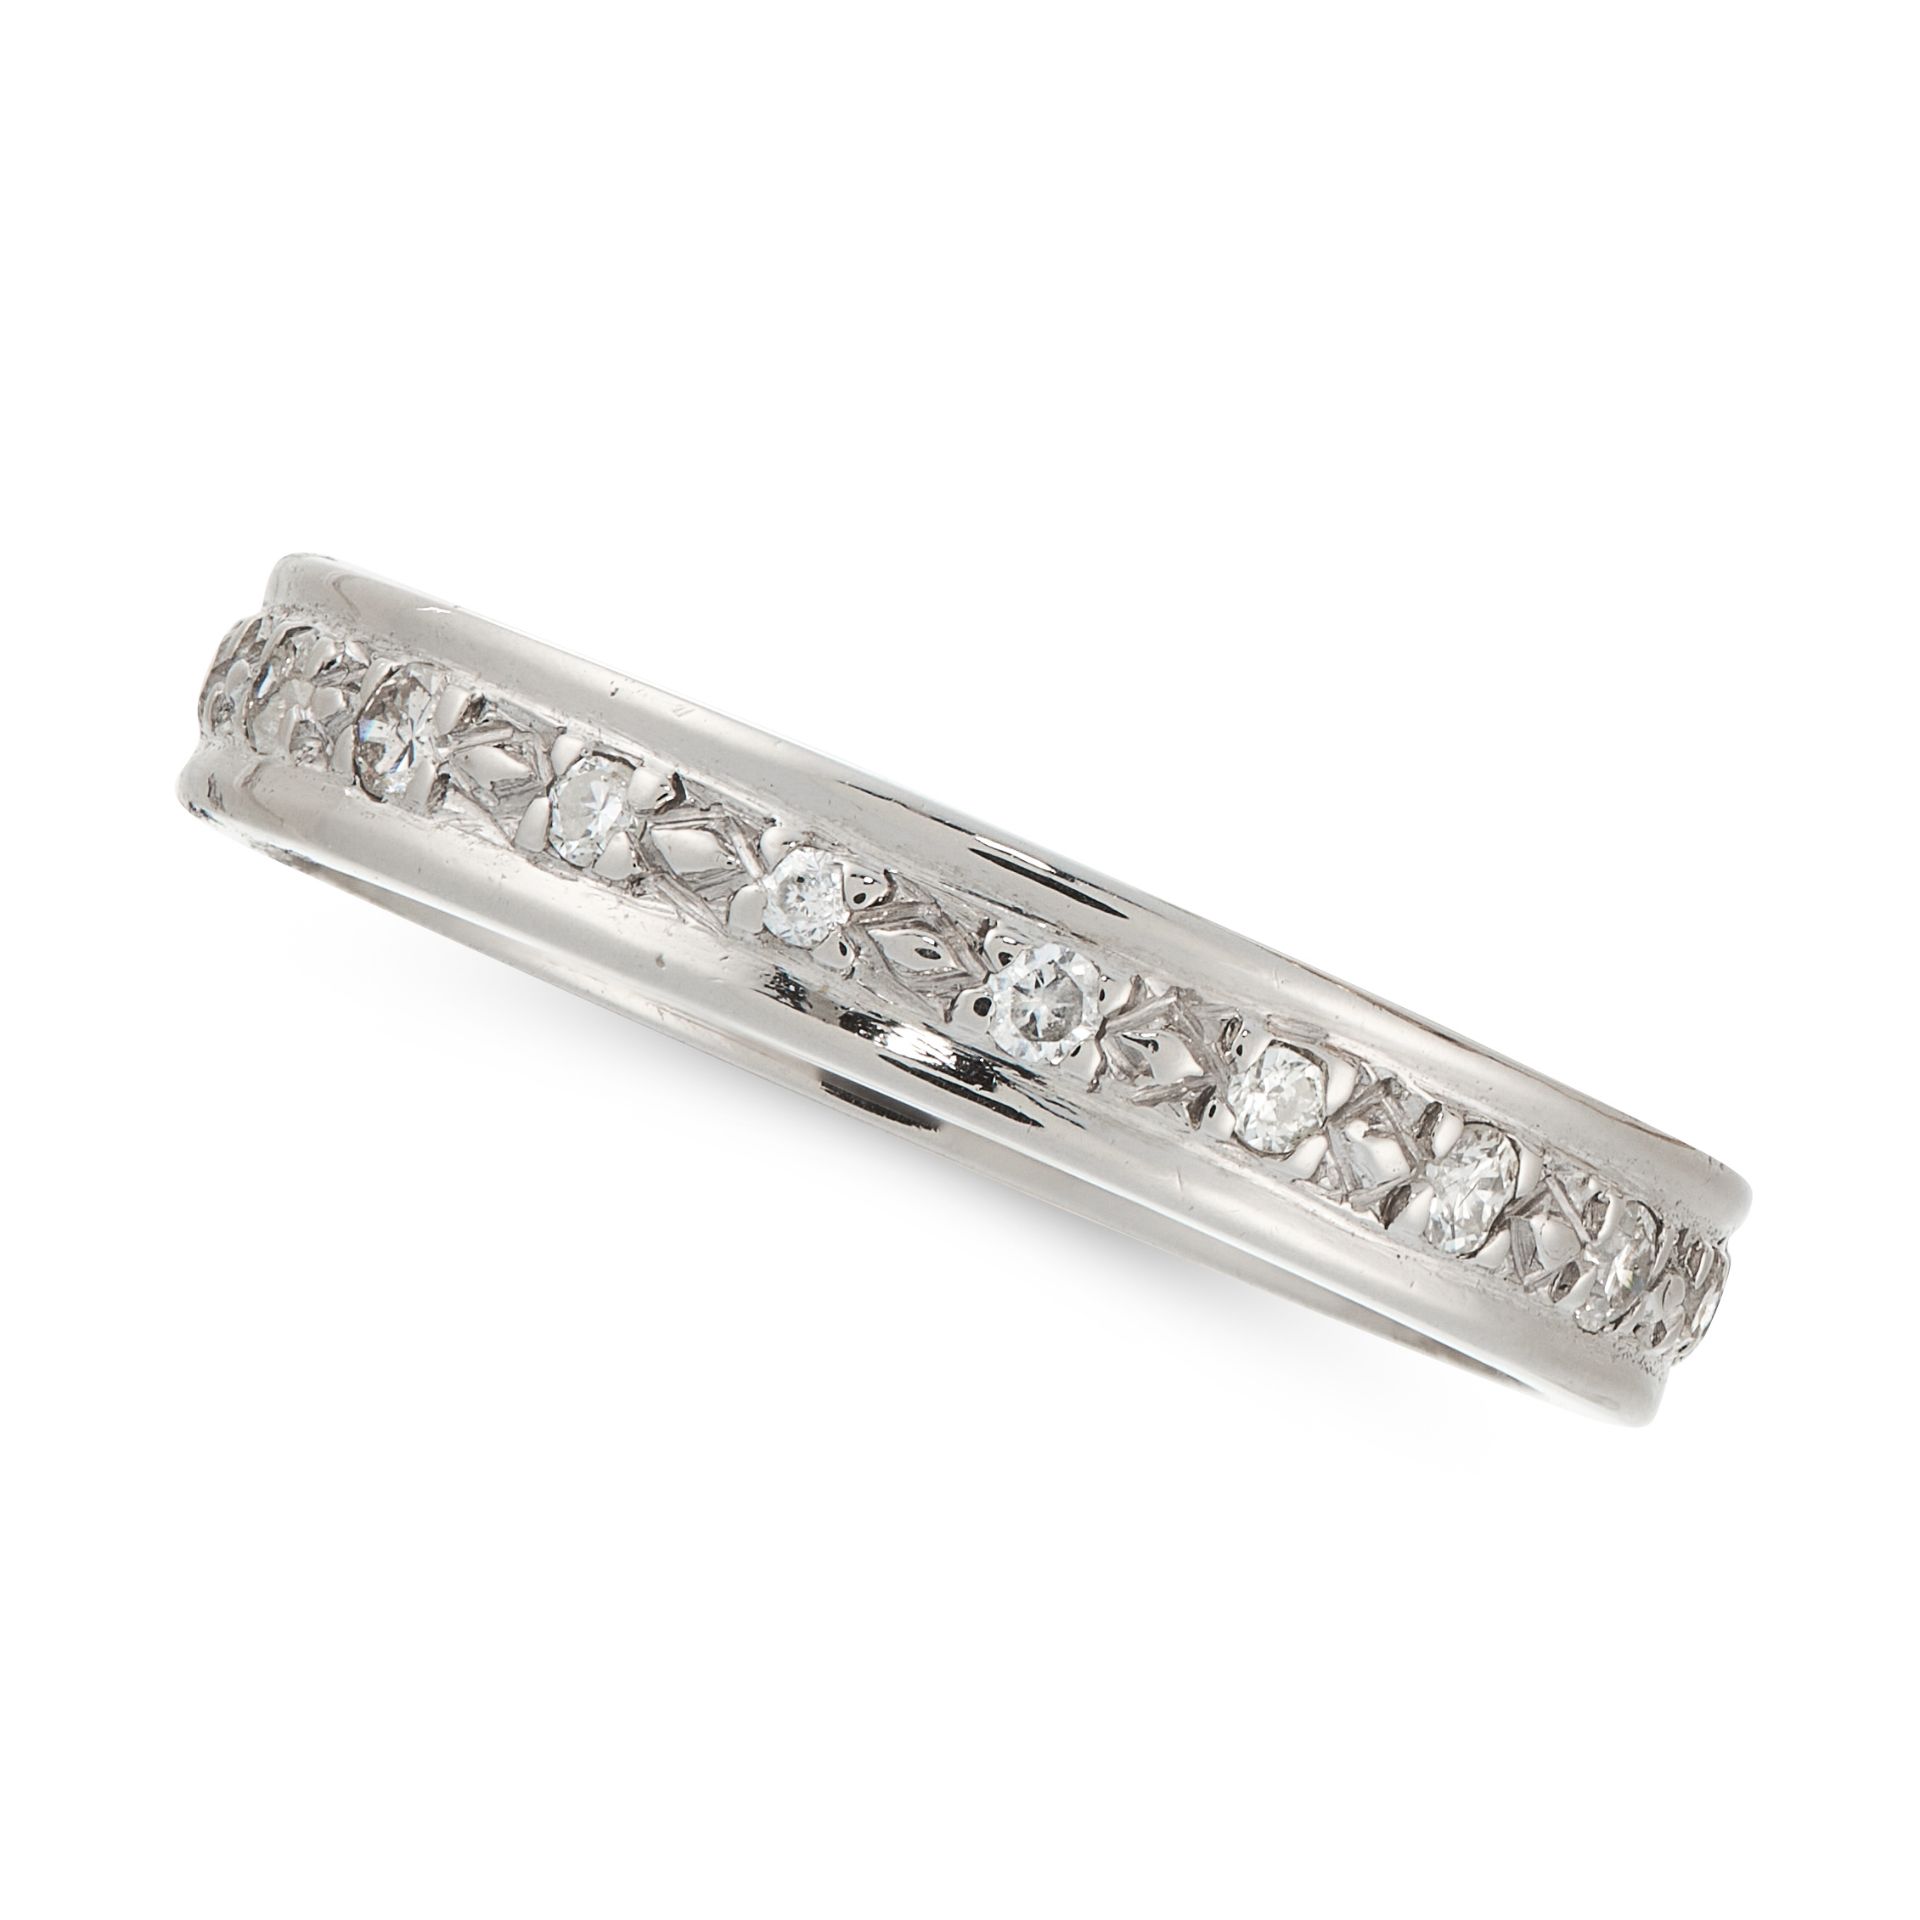 A DIAMOND ETERNITY RING set with round cut diamonds totalling 0.4-0.5 carats, unmarked, size Q /